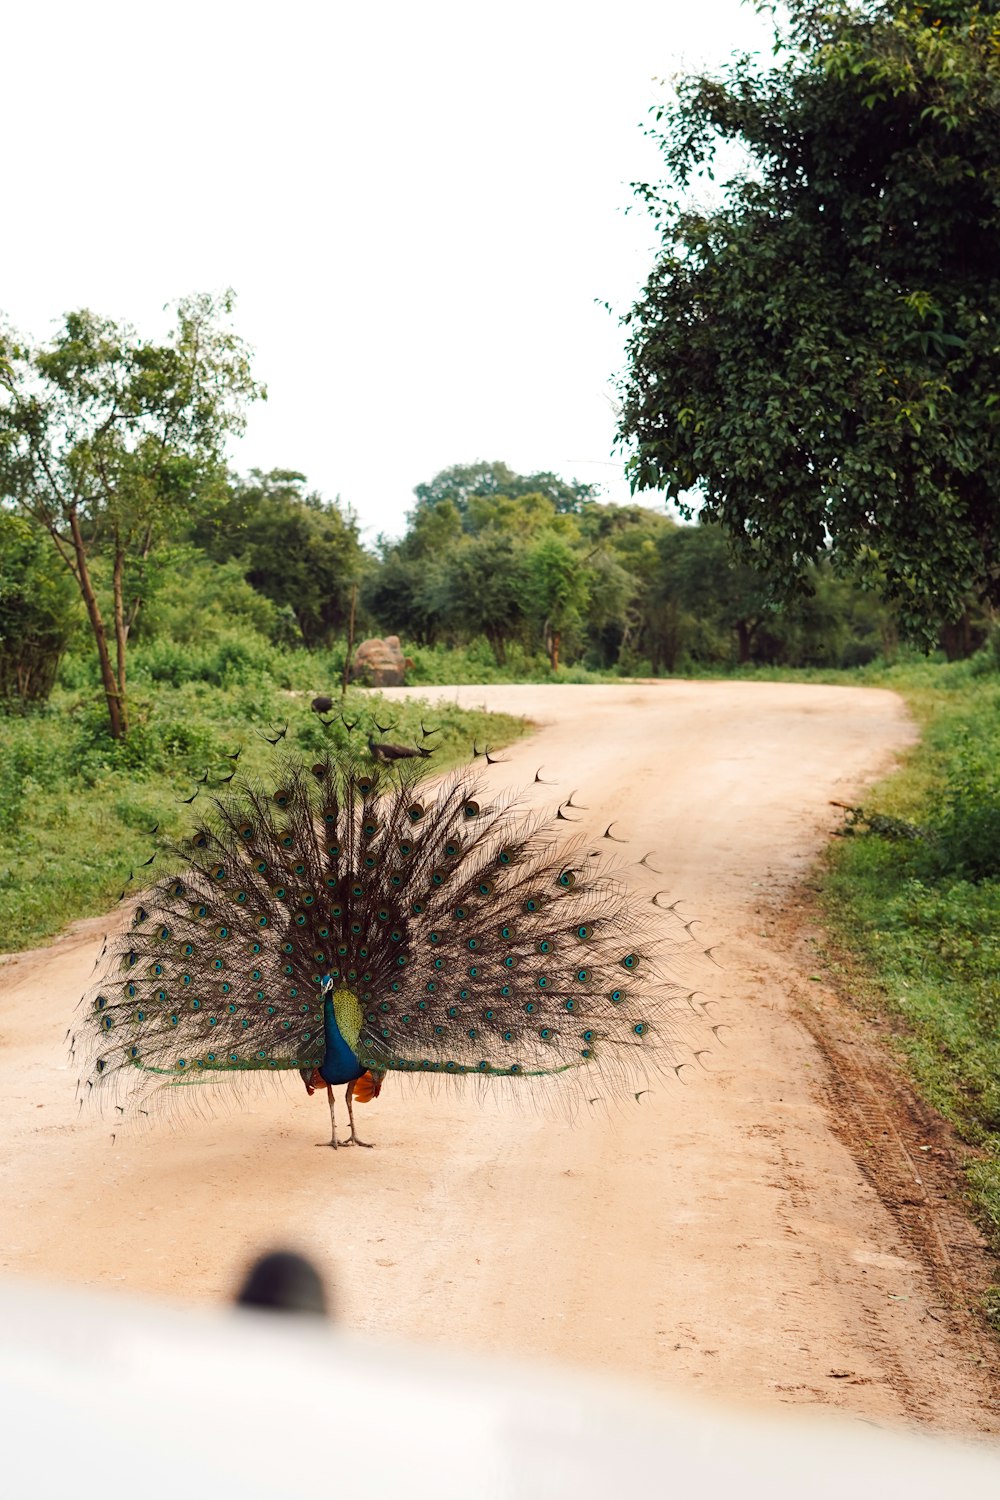 a peacock standing on a dirt road next to a forest